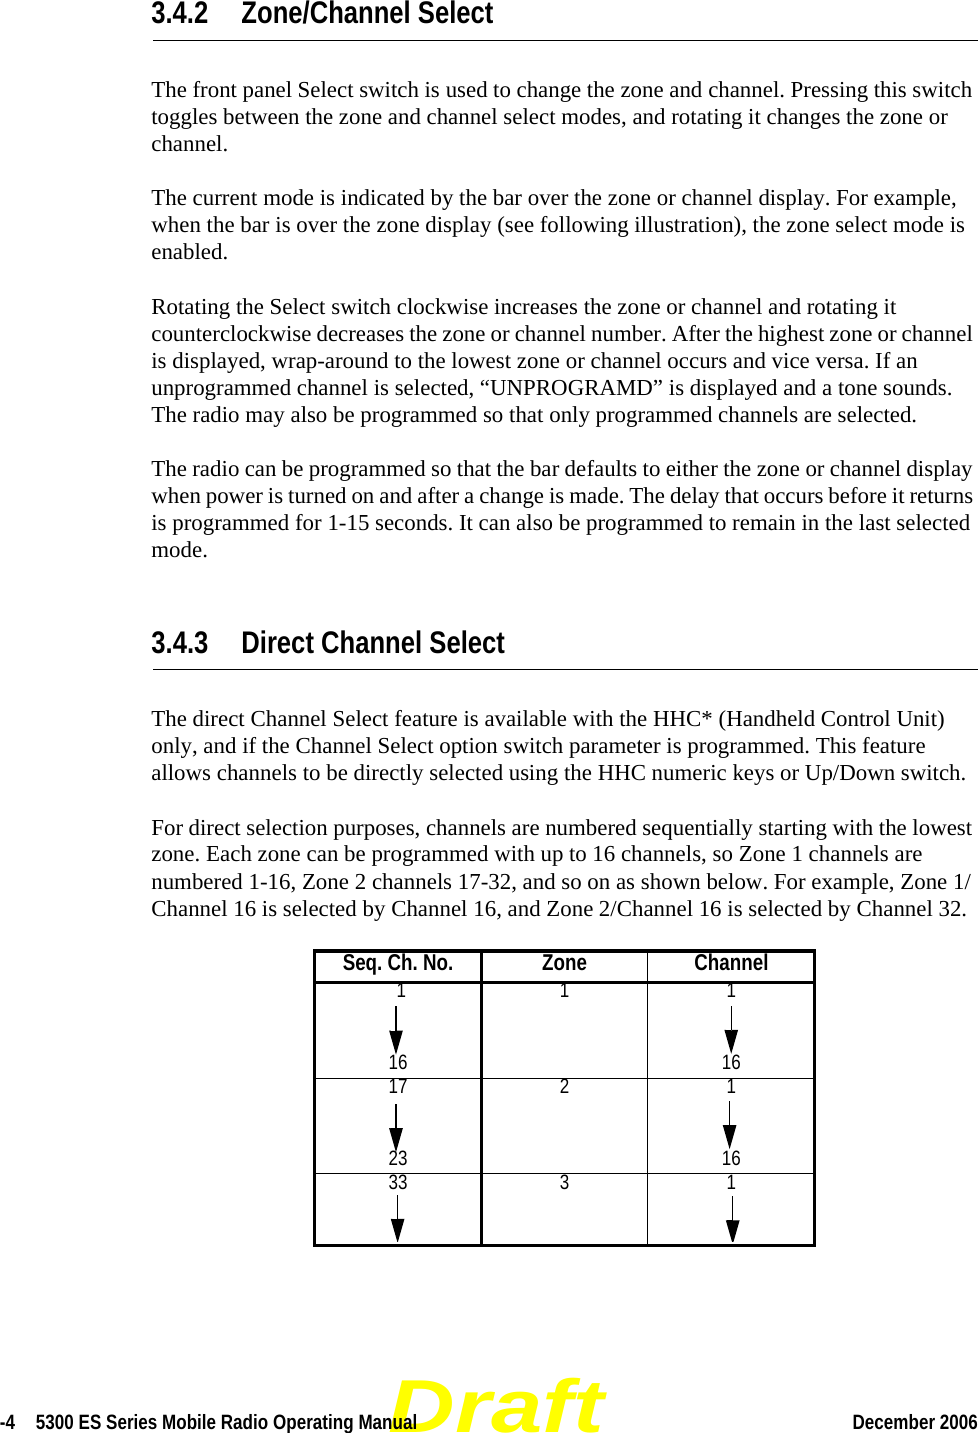 Draft-4  5300 ES Series Mobile Radio Operating Manual December 2006 3.4.2 Zone/Channel Select The front panel Select switch is used to change the zone and channel. Pressing this switch toggles between the zone and channel select modes, and rotating it changes the zone or channel.The current mode is indicated by the bar over the zone or channel display. For example, when the bar is over the zone display (see following illustration), the zone select mode is enabled.Rotating the Select switch clockwise increases the zone or channel and rotating it counterclockwise decreases the zone or channel number. After the highest zone or channel is displayed, wrap-around to the lowest zone or channel occurs and vice versa. If an unprogrammed channel is selected, “UNPROGRAMD” is displayed and a tone sounds. The radio may also be programmed so that only programmed channels are selected.The radio can be programmed so that the bar defaults to either the zone or channel display when power is turned on and after a change is made. The delay that occurs before it returns is programmed for 1-15 seconds. It can also be programmed to remain in the last selected mode.3.4.3 Direct Channel SelectThe direct Channel Select feature is available with the HHC* (Handheld Control Unit) only, and if the Channel Select option switch parameter is programmed. This feature allows channels to be directly selected using the HHC numeric keys or Up/Down switch. For direct selection purposes, channels are numbered sequentially starting with the lowest zone. Each zone can be programmed with up to 16 channels, so Zone 1 channels are numbered 1-16, Zone 2 channels 17-32, and so on as shown below. For example, Zone 1/Channel 16 is selected by Channel 16, and Zone 2/Channel 16 is selected by Channel 32.Seq. Ch. No. Zone Channel1111 116 1617 2 123 1633 3 1